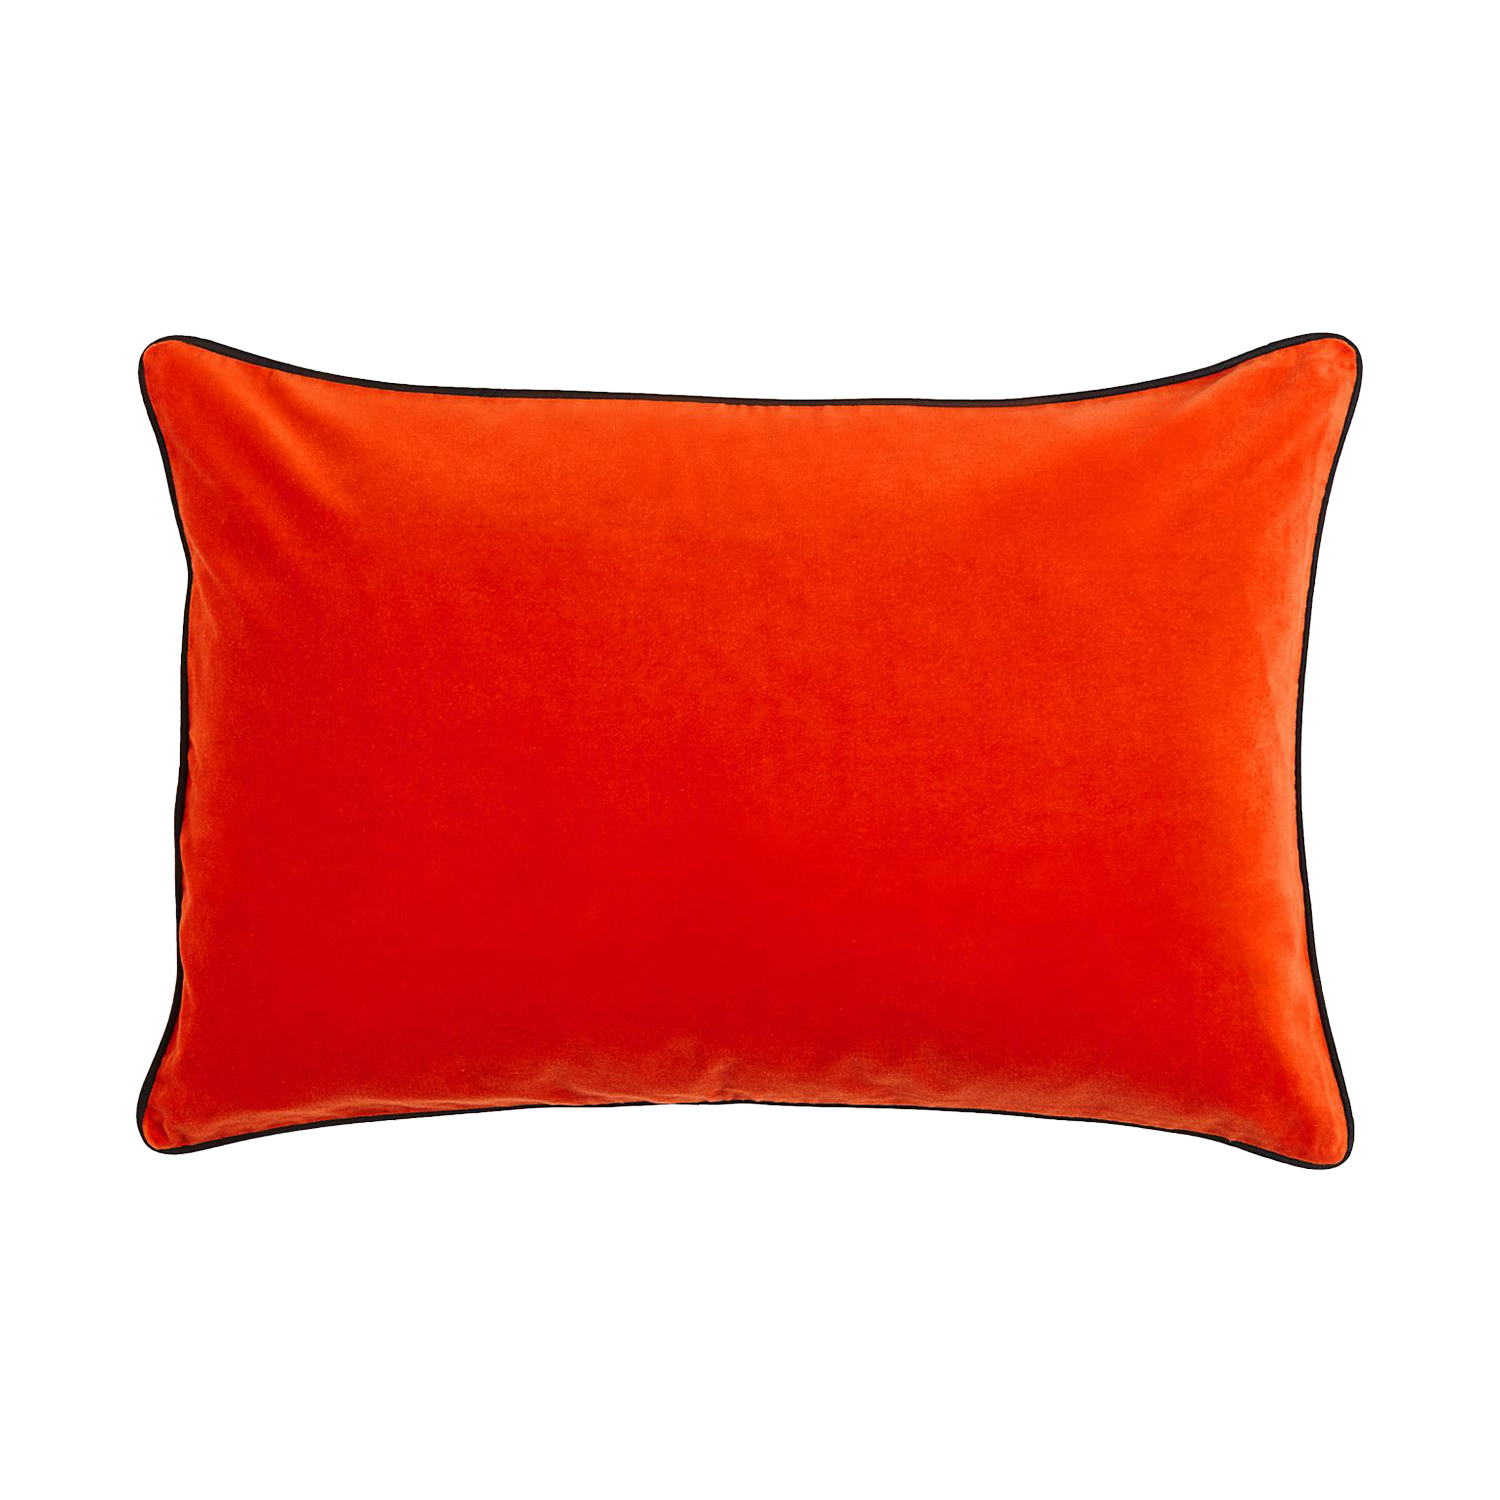 H&M Home Red Cotton Velvet Cushion Cover.